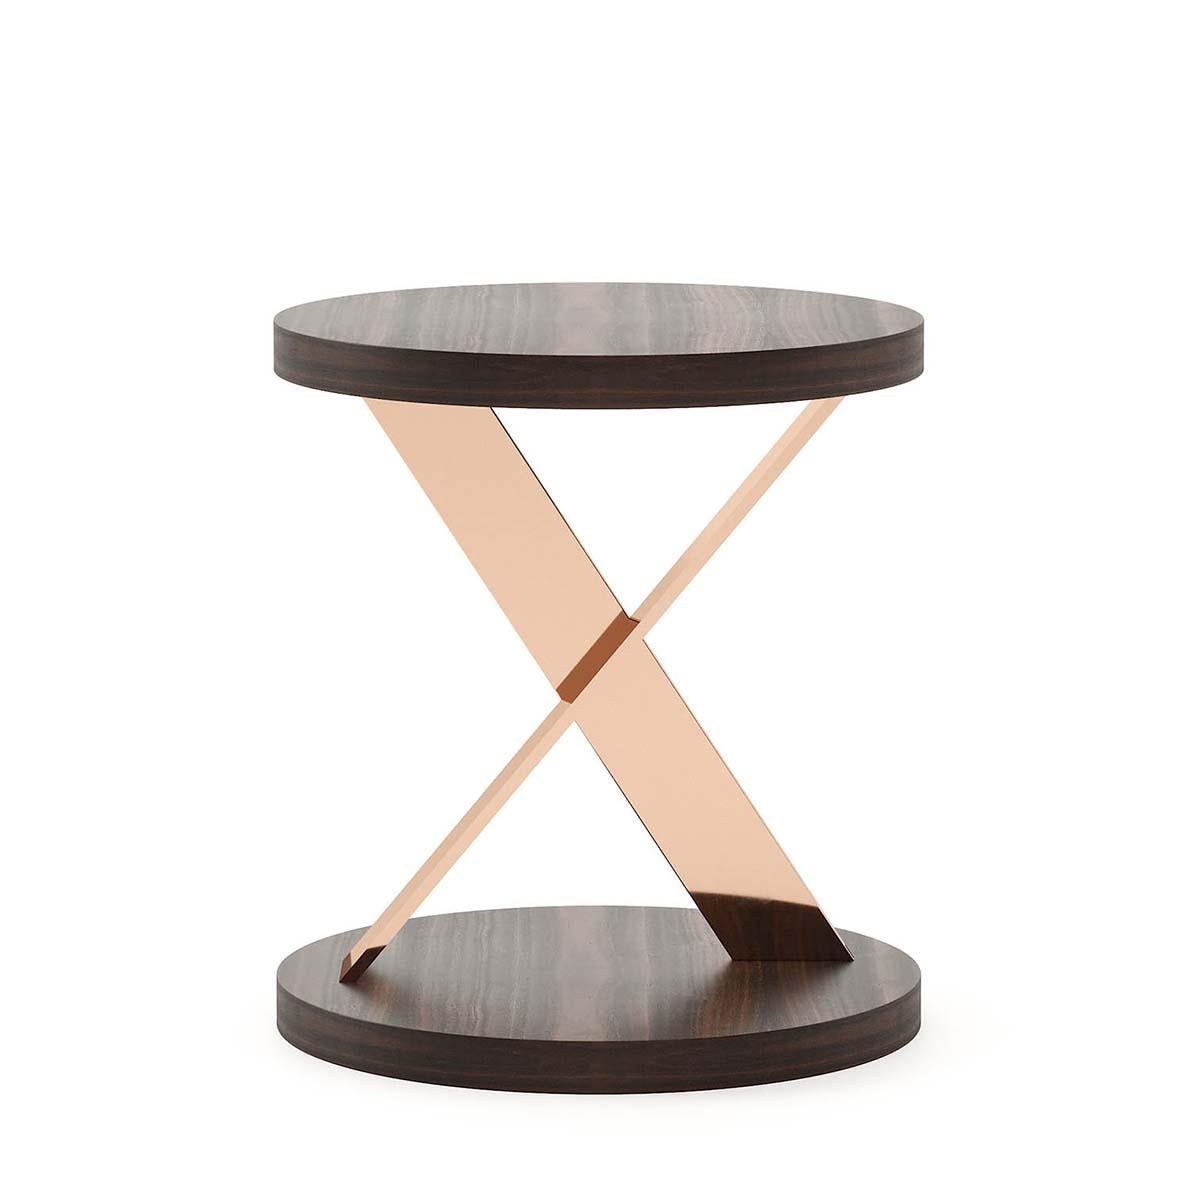 Side table Xena with stainless steel base
in copper finish, with up and down tops in
eucalyptus wood in matte finish.
Also available with gold finish base.
Also available in other finishes on request.